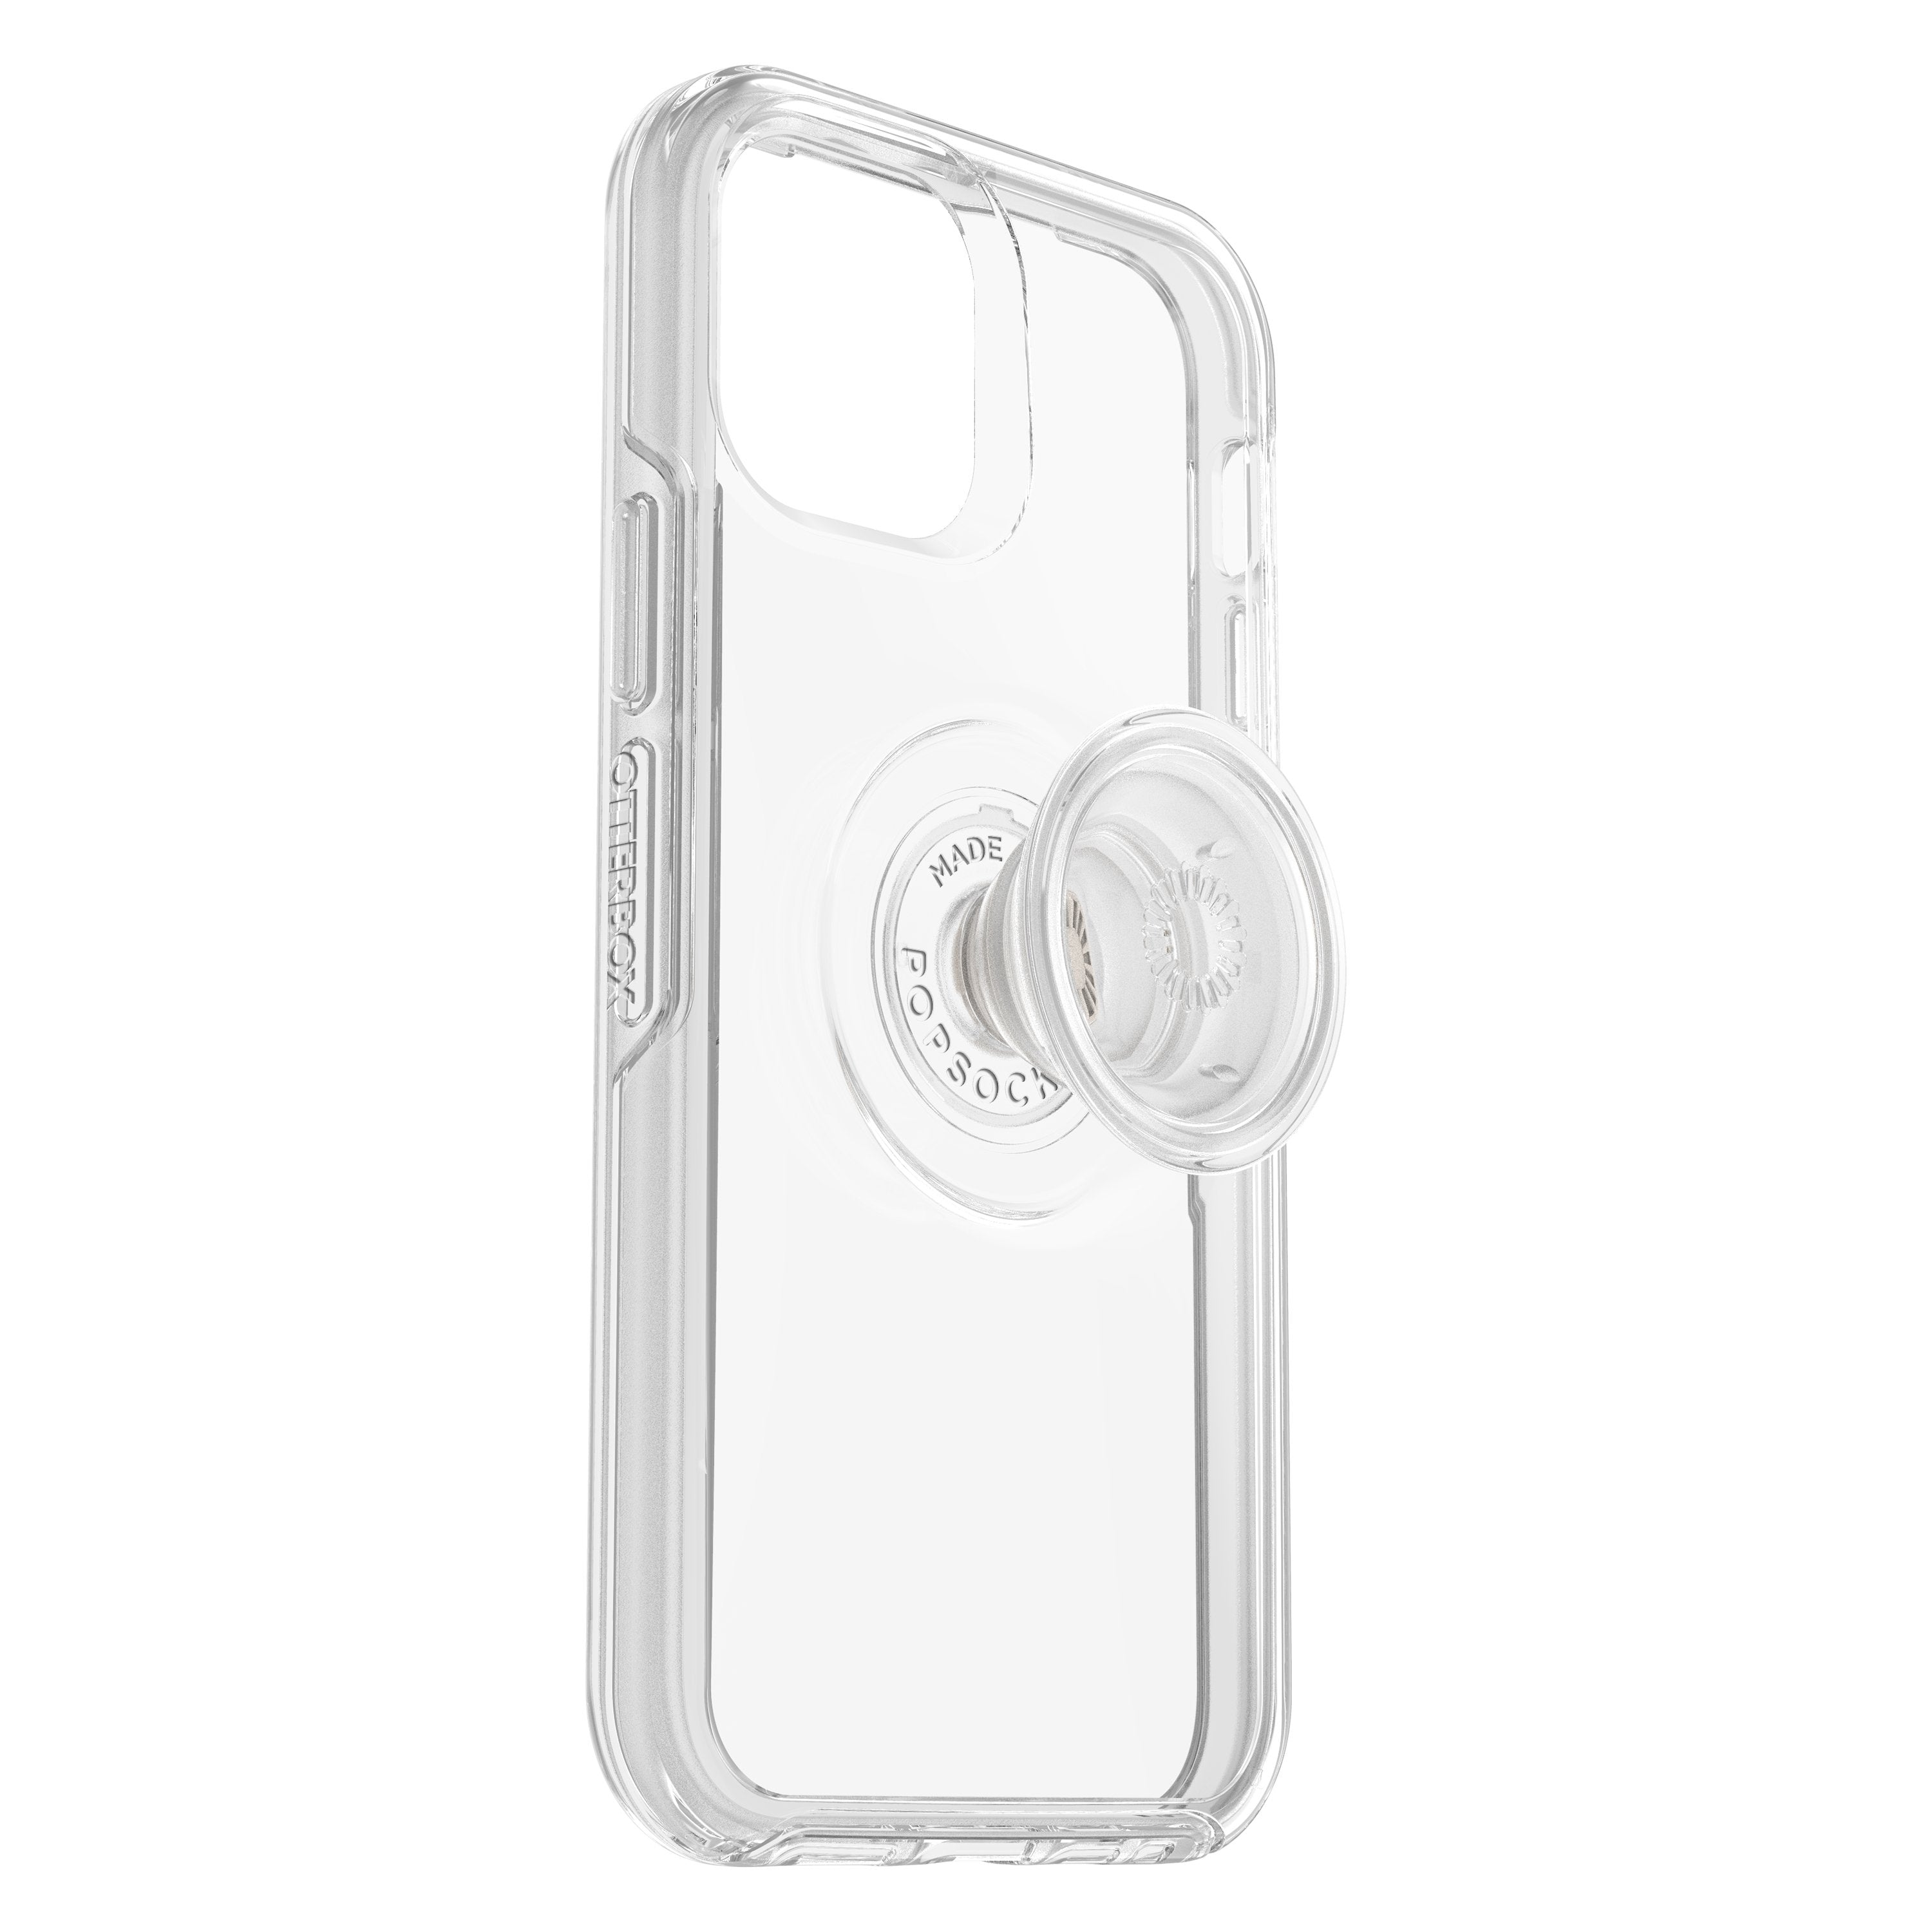 OtterBox OTTER+POP SYMMETRY Apple iPhone 12 / 12 Pro case - Drop Protection Cover w/ PopSocket Phone Holder, Slim Protective Selfie Case, Wireless Charging Compatible - Clear